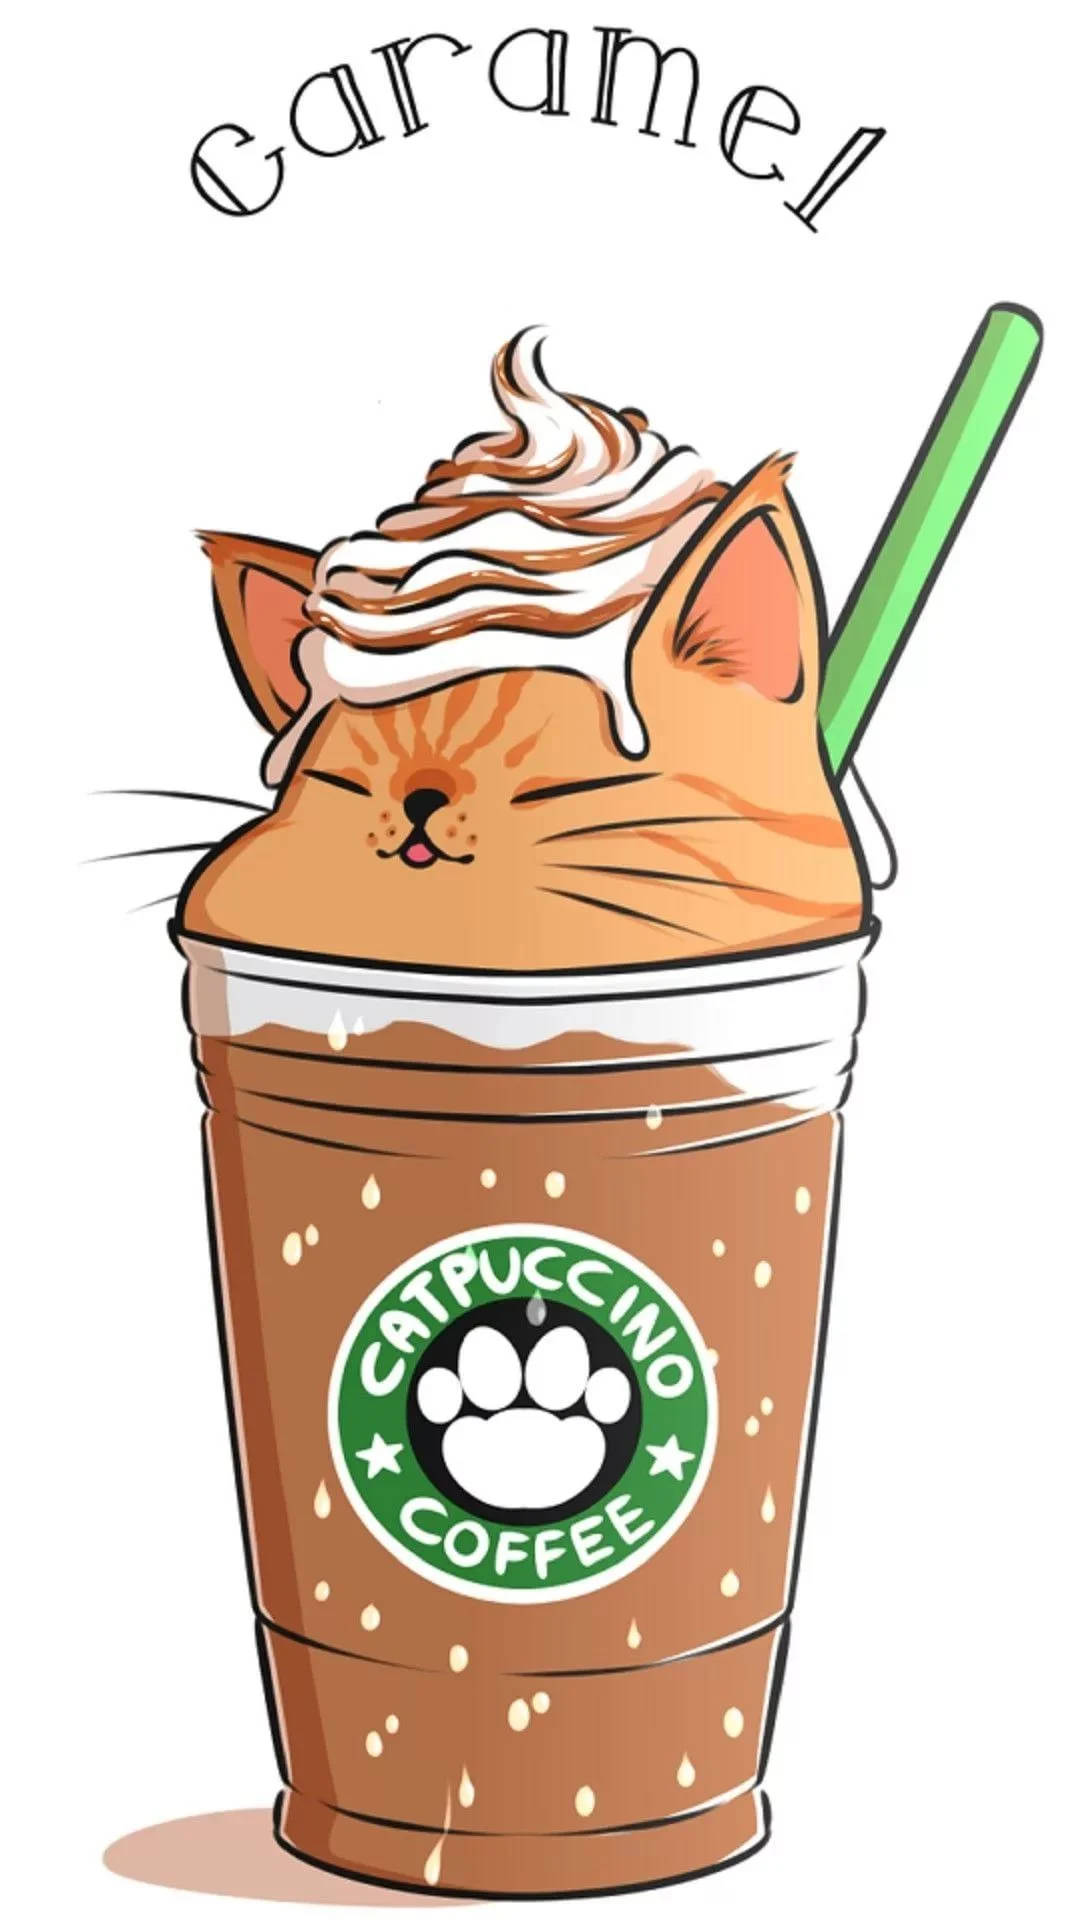 Download Whimsical Catpuccino Art At Starbucks Wallpaper | Wallpapers.Com